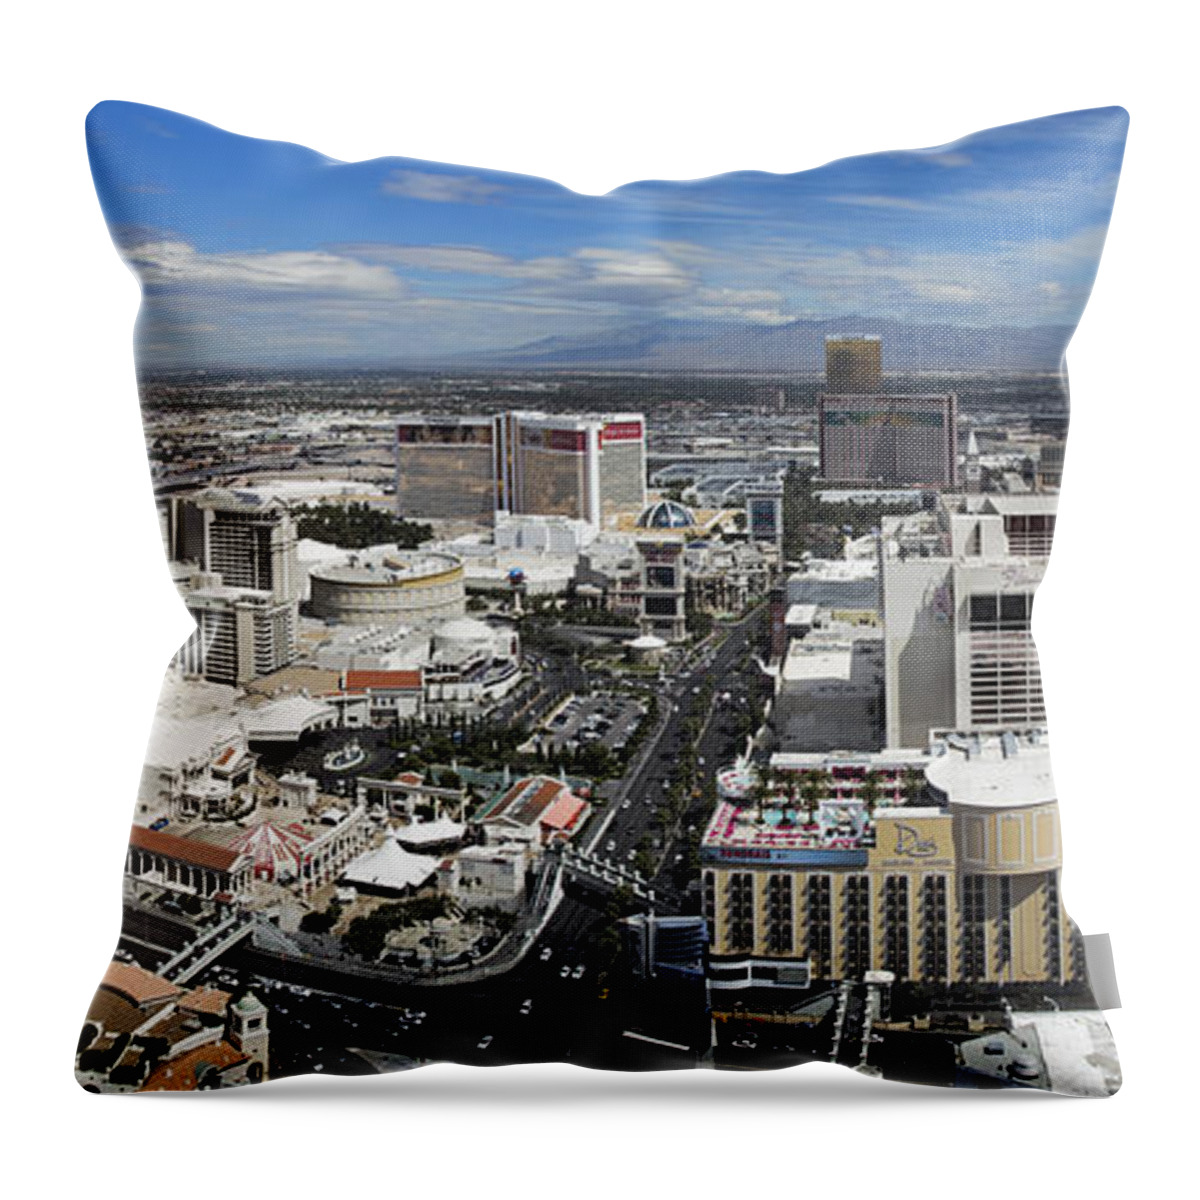 Las Vegas Throw Pillow featuring the photograph Strip And Flamingo by Ricky Barnard